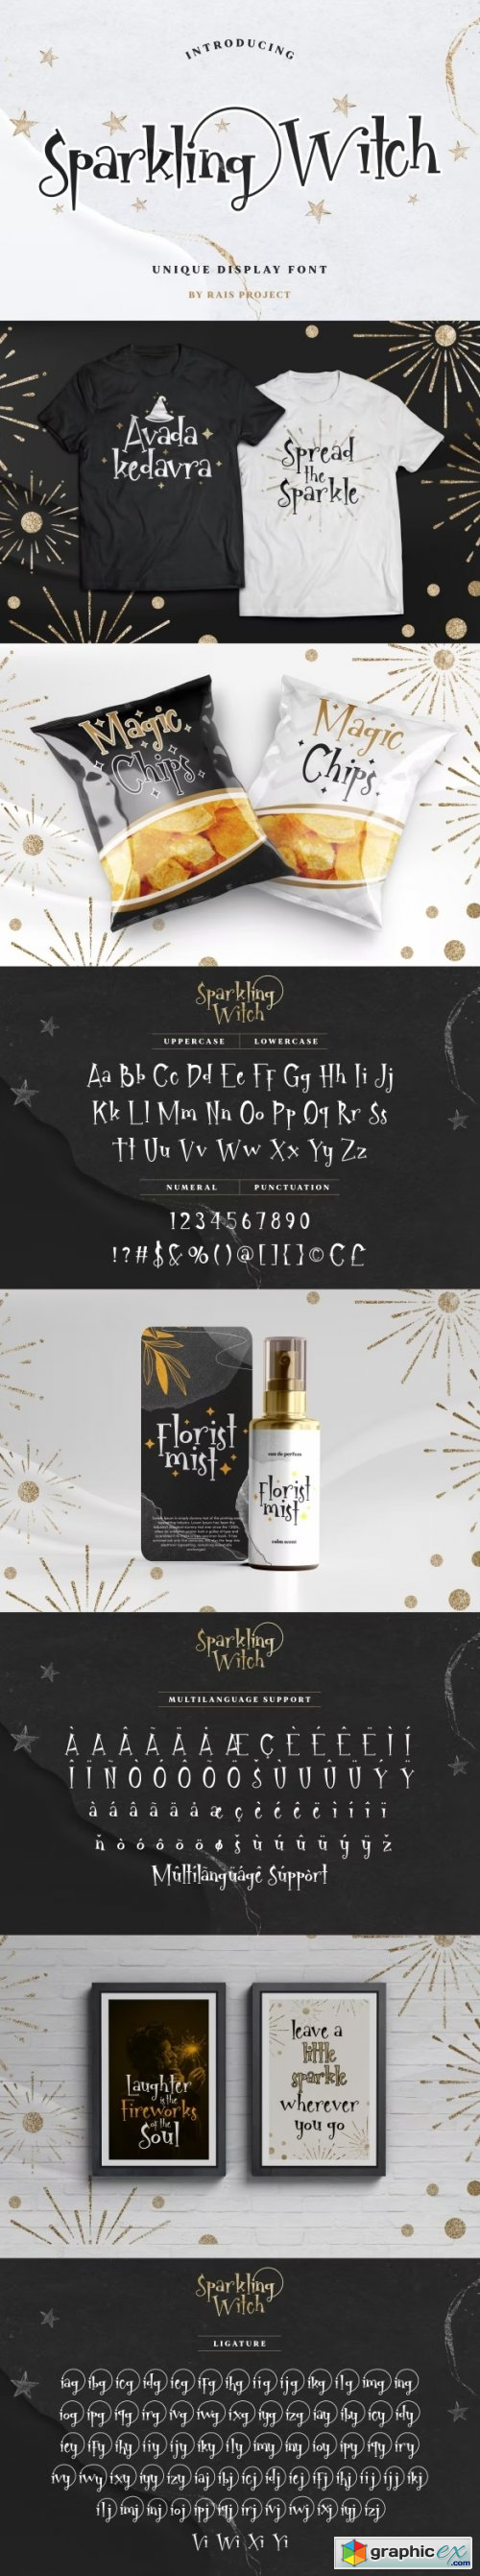 Sparkling Witch Font